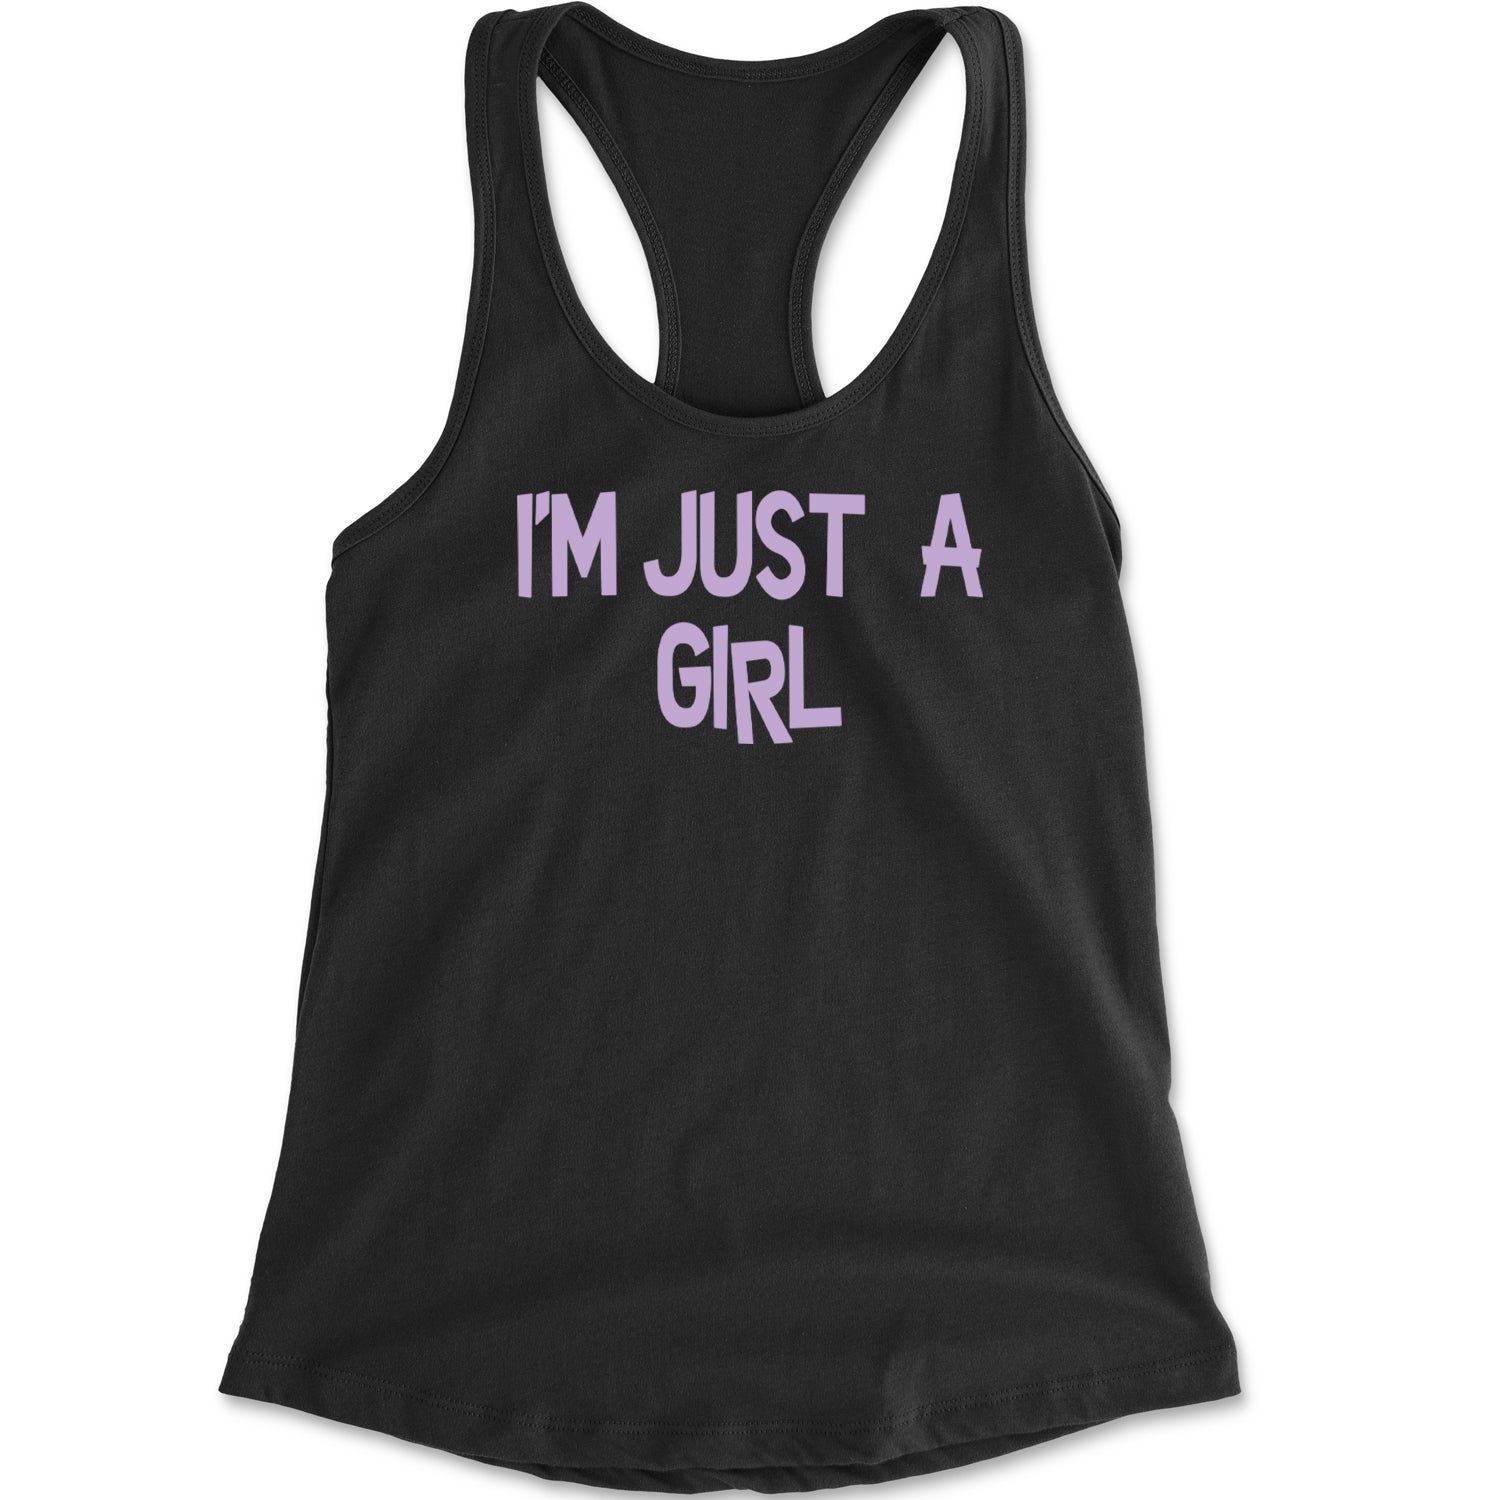 I'm Just A Girl Guts Music Racerback Tank Top for Women